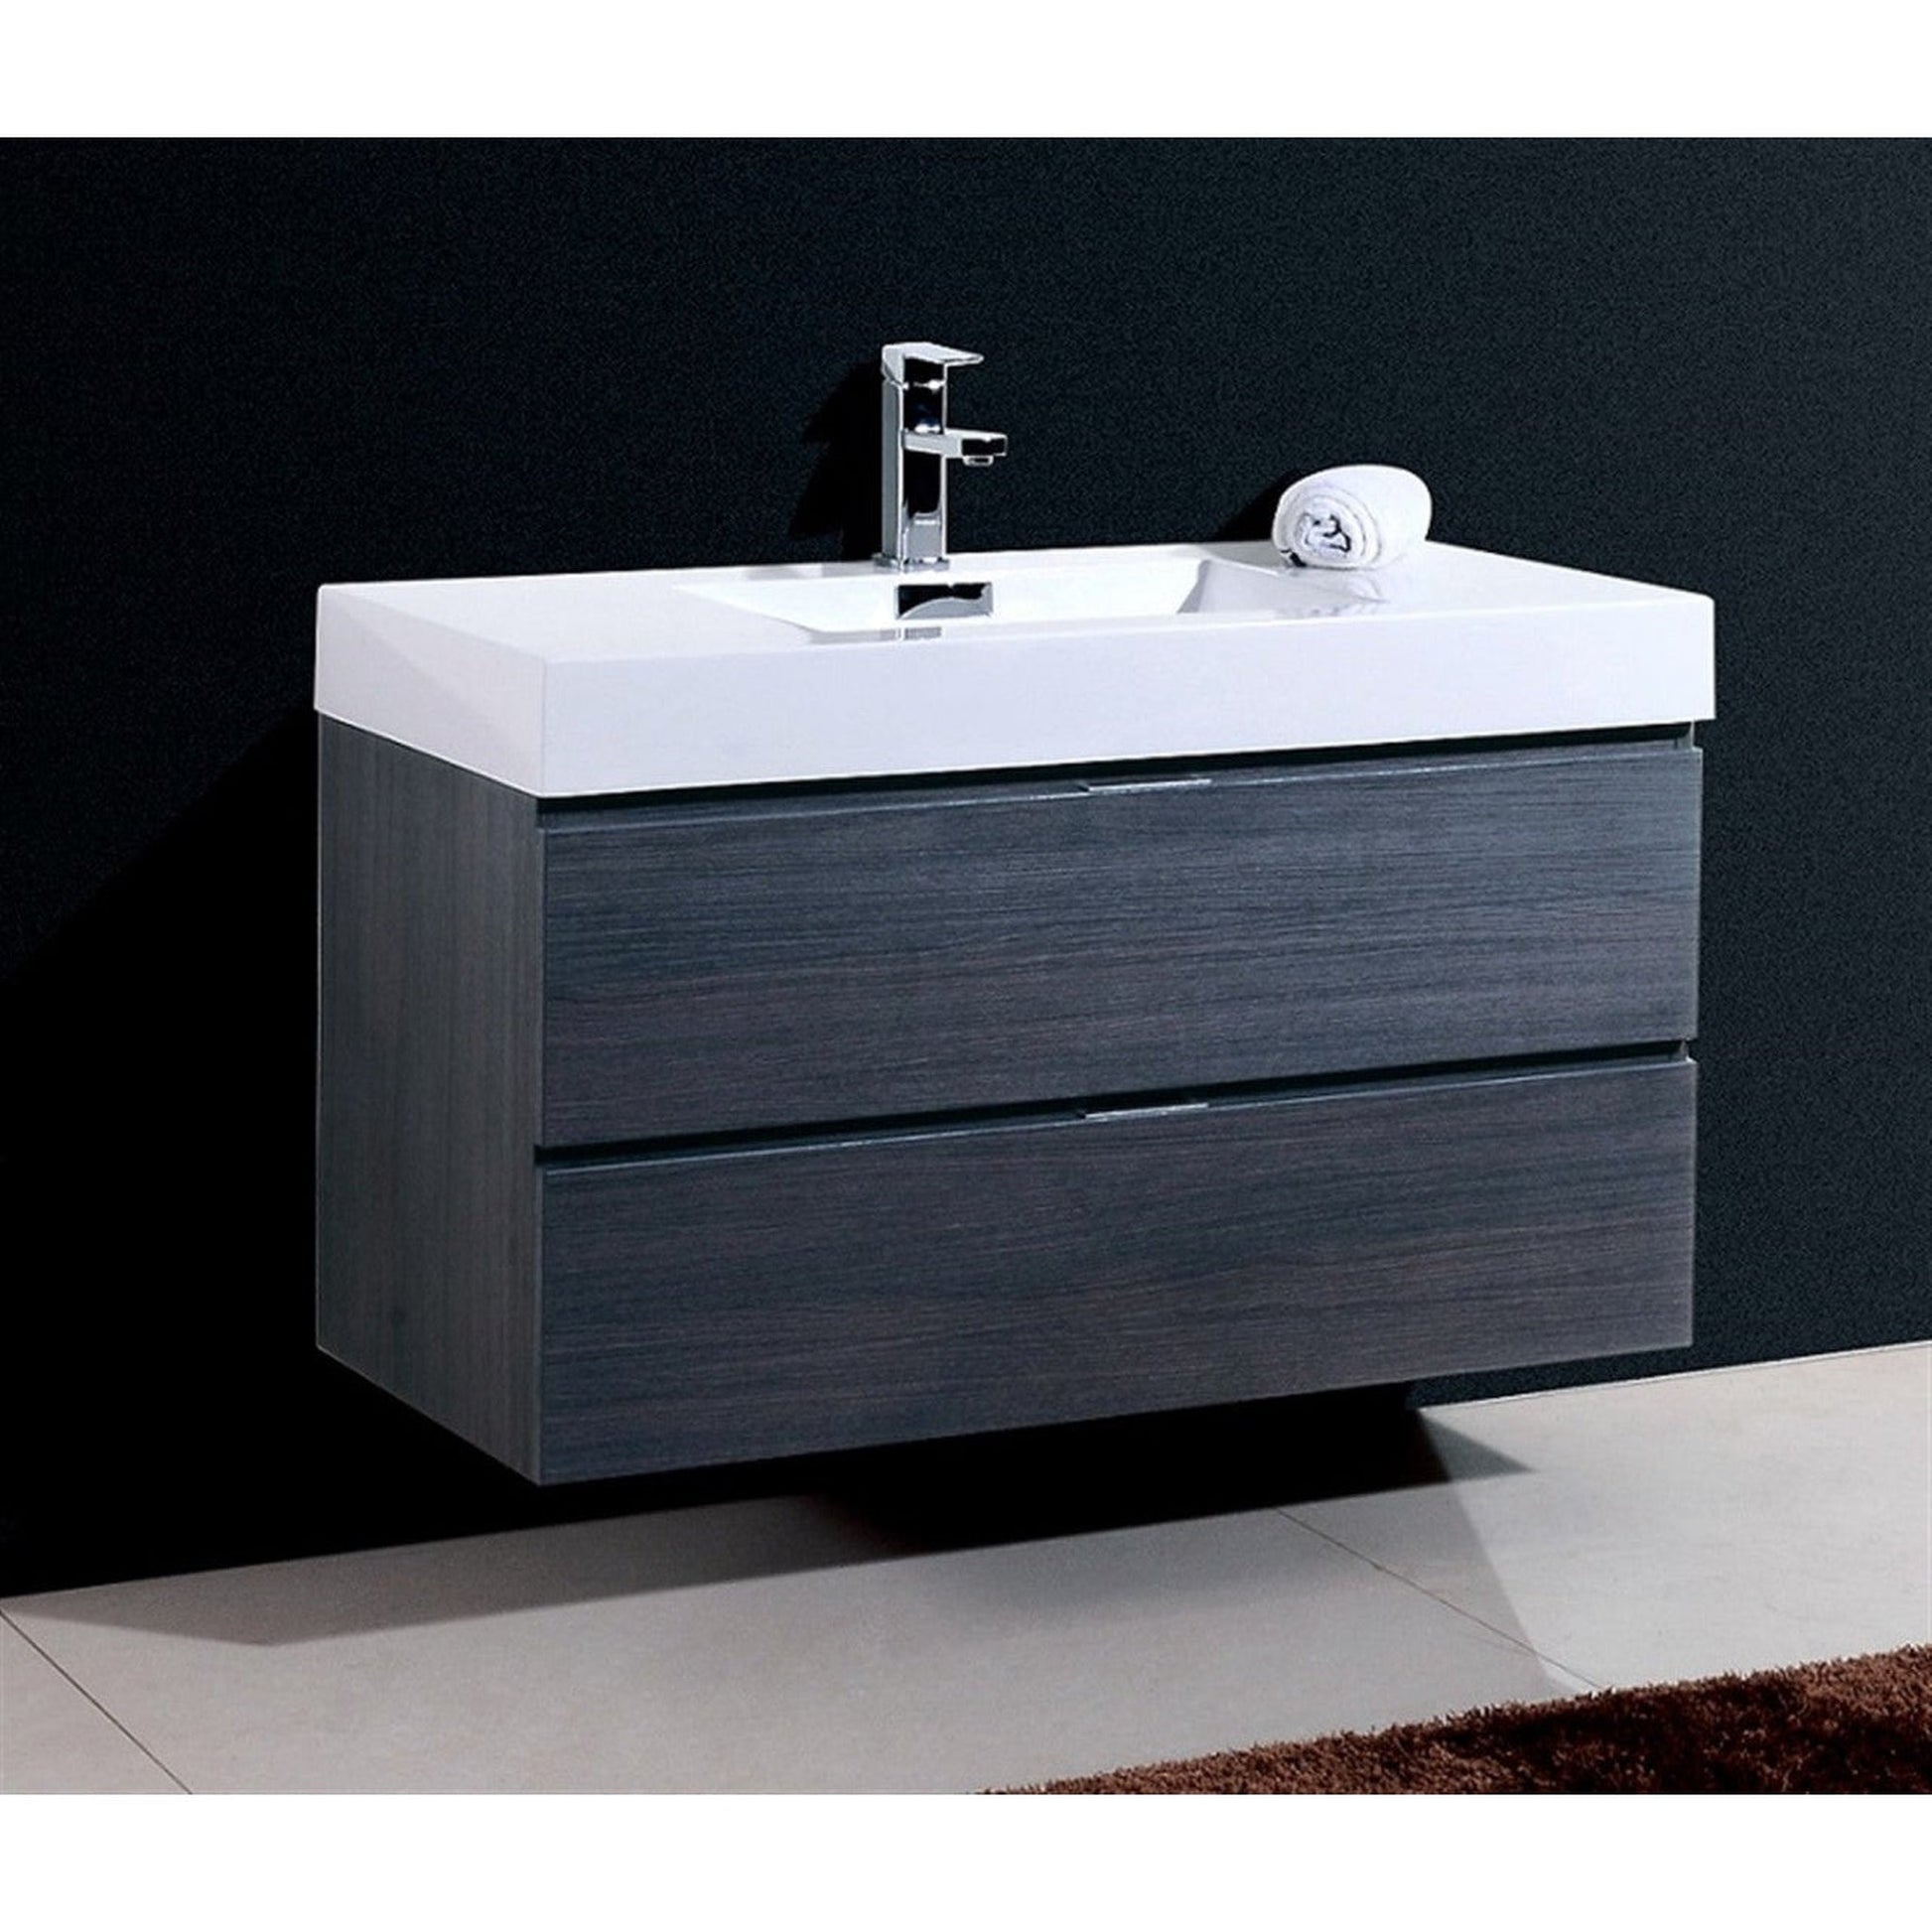 KubeBath Bliss 40" Gray Oak Wall-Mounted Modern Bathroom Vanity With Single Integrated Acrylic Sink With Overflow and 38" Gray Oak Framed Mirror With Shelf